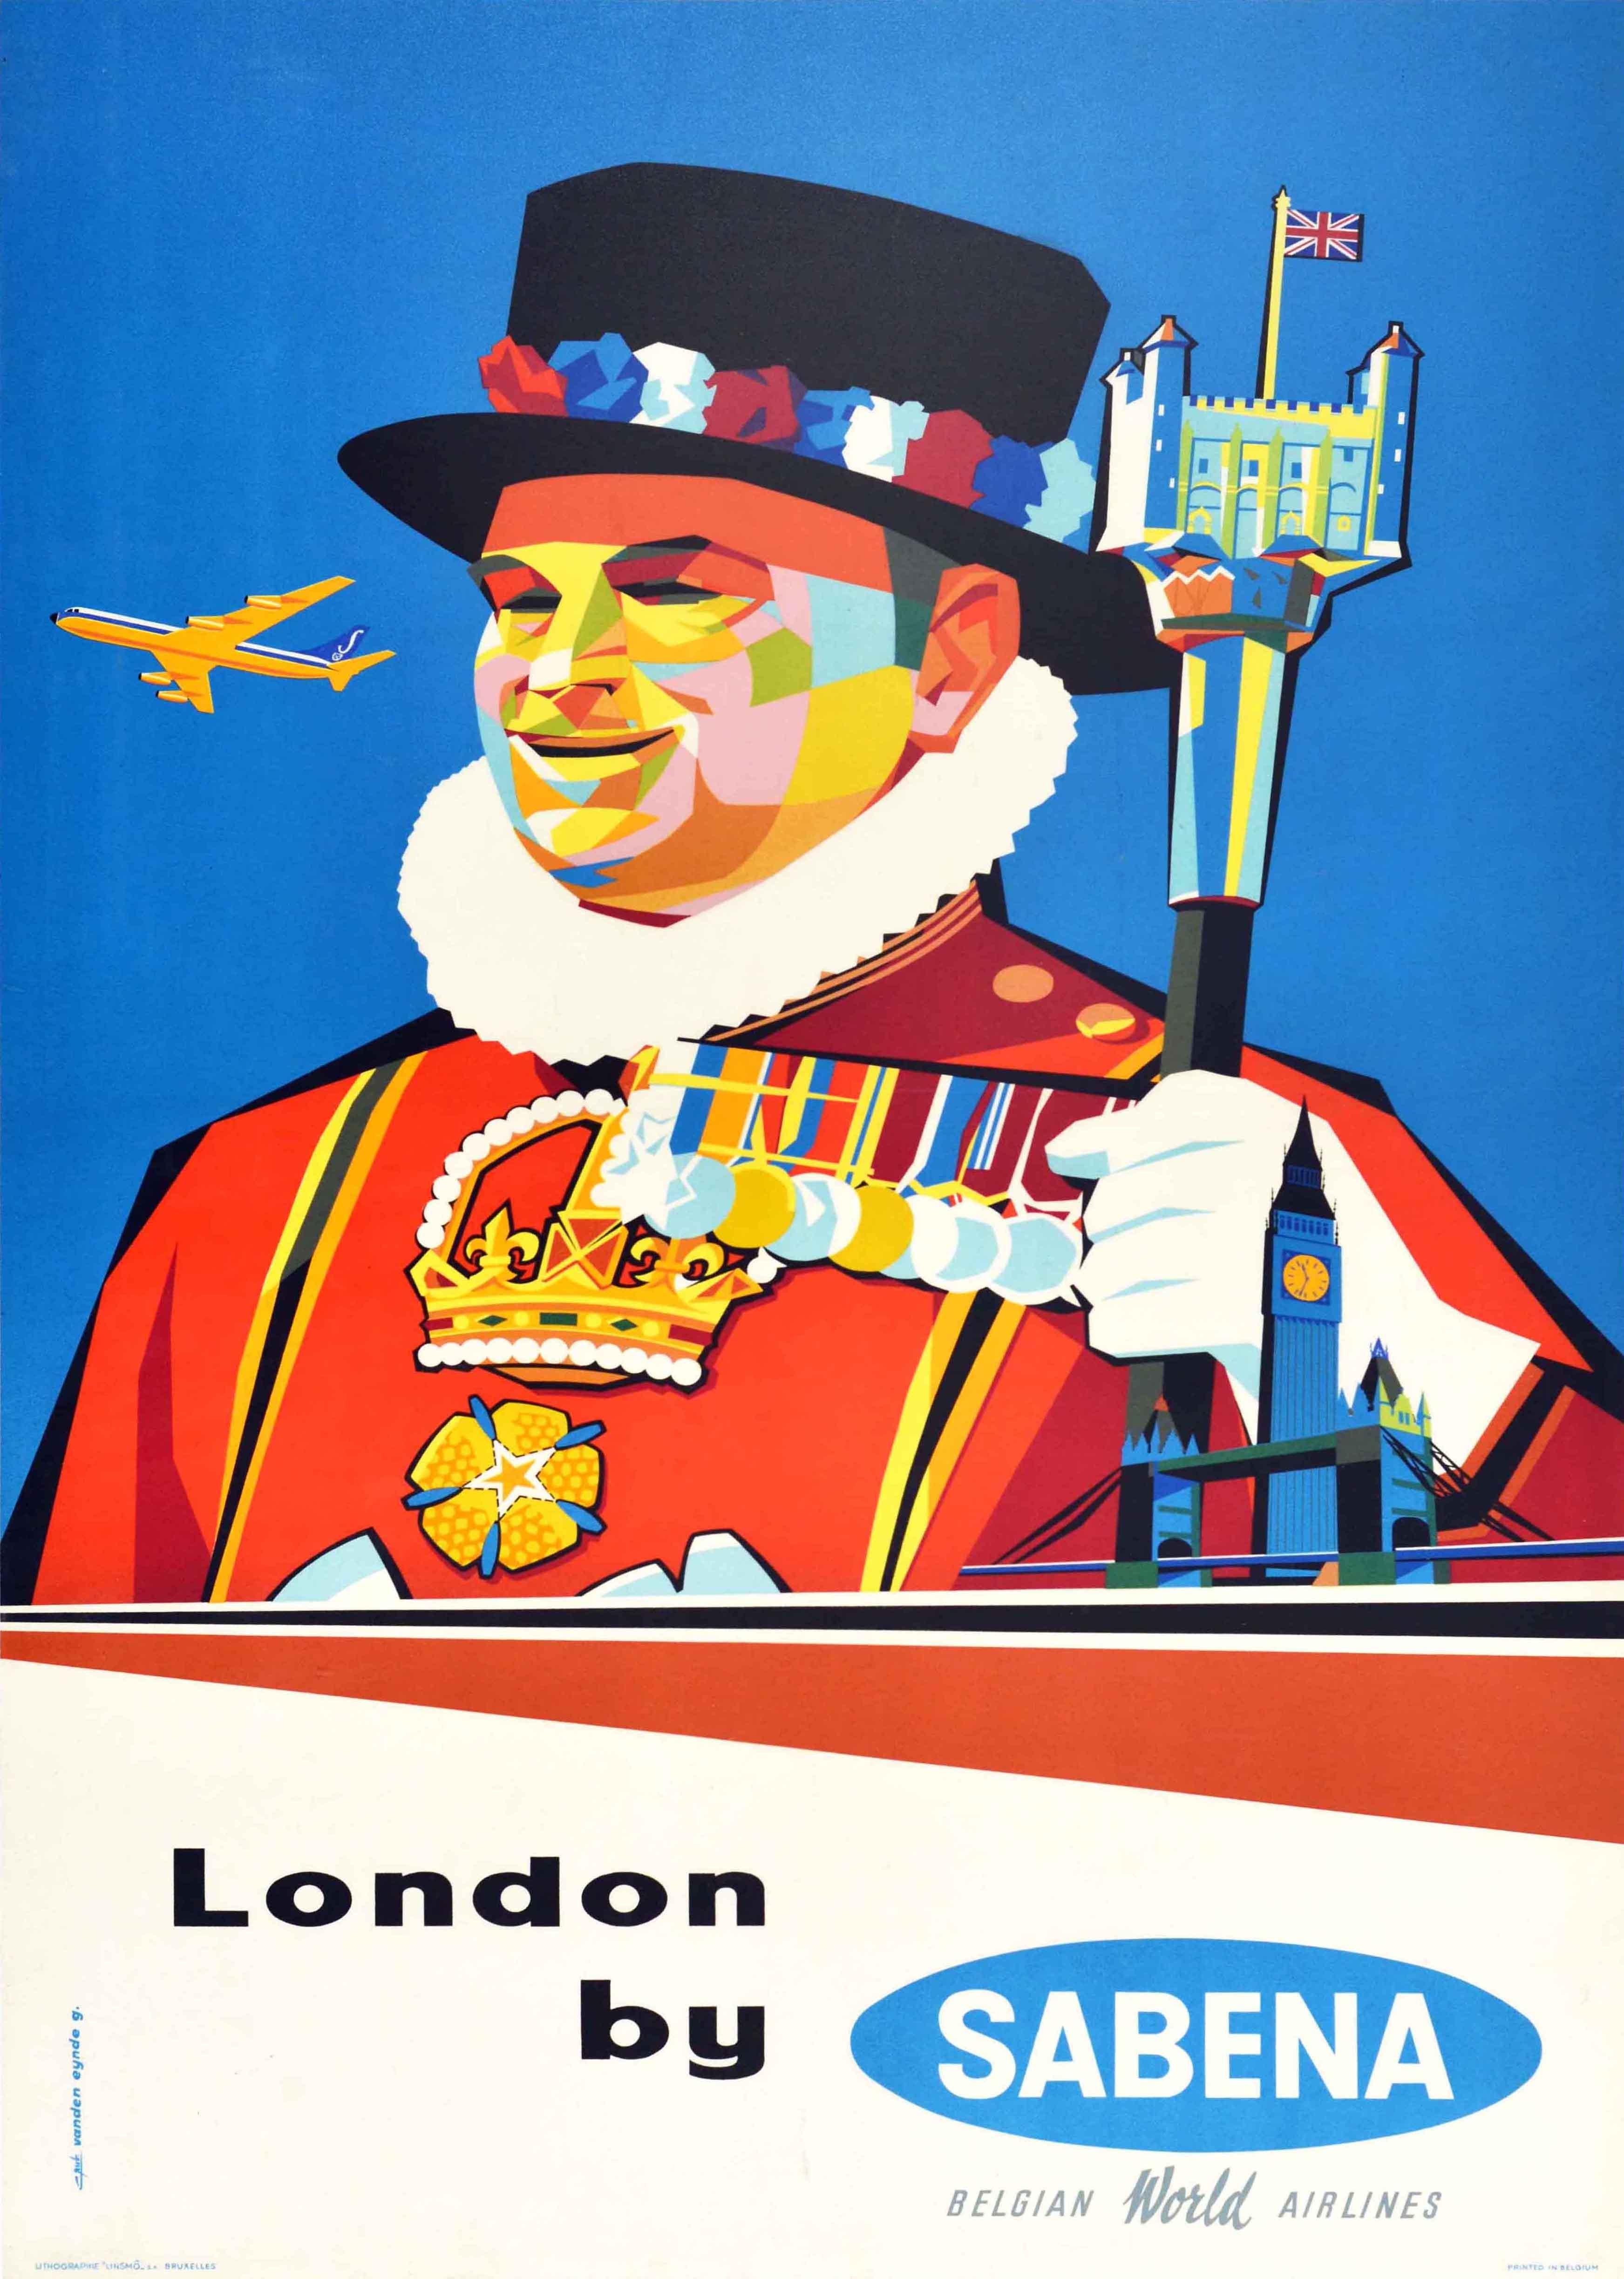 Original vintage travel advertising poster for London by Sabena Belgian Airlines featuring a fantastic and colourful mid-century modern design depicting a Beefeater / Yeoman Warder holding a stick with the Tower of London and Union Jack flag flying